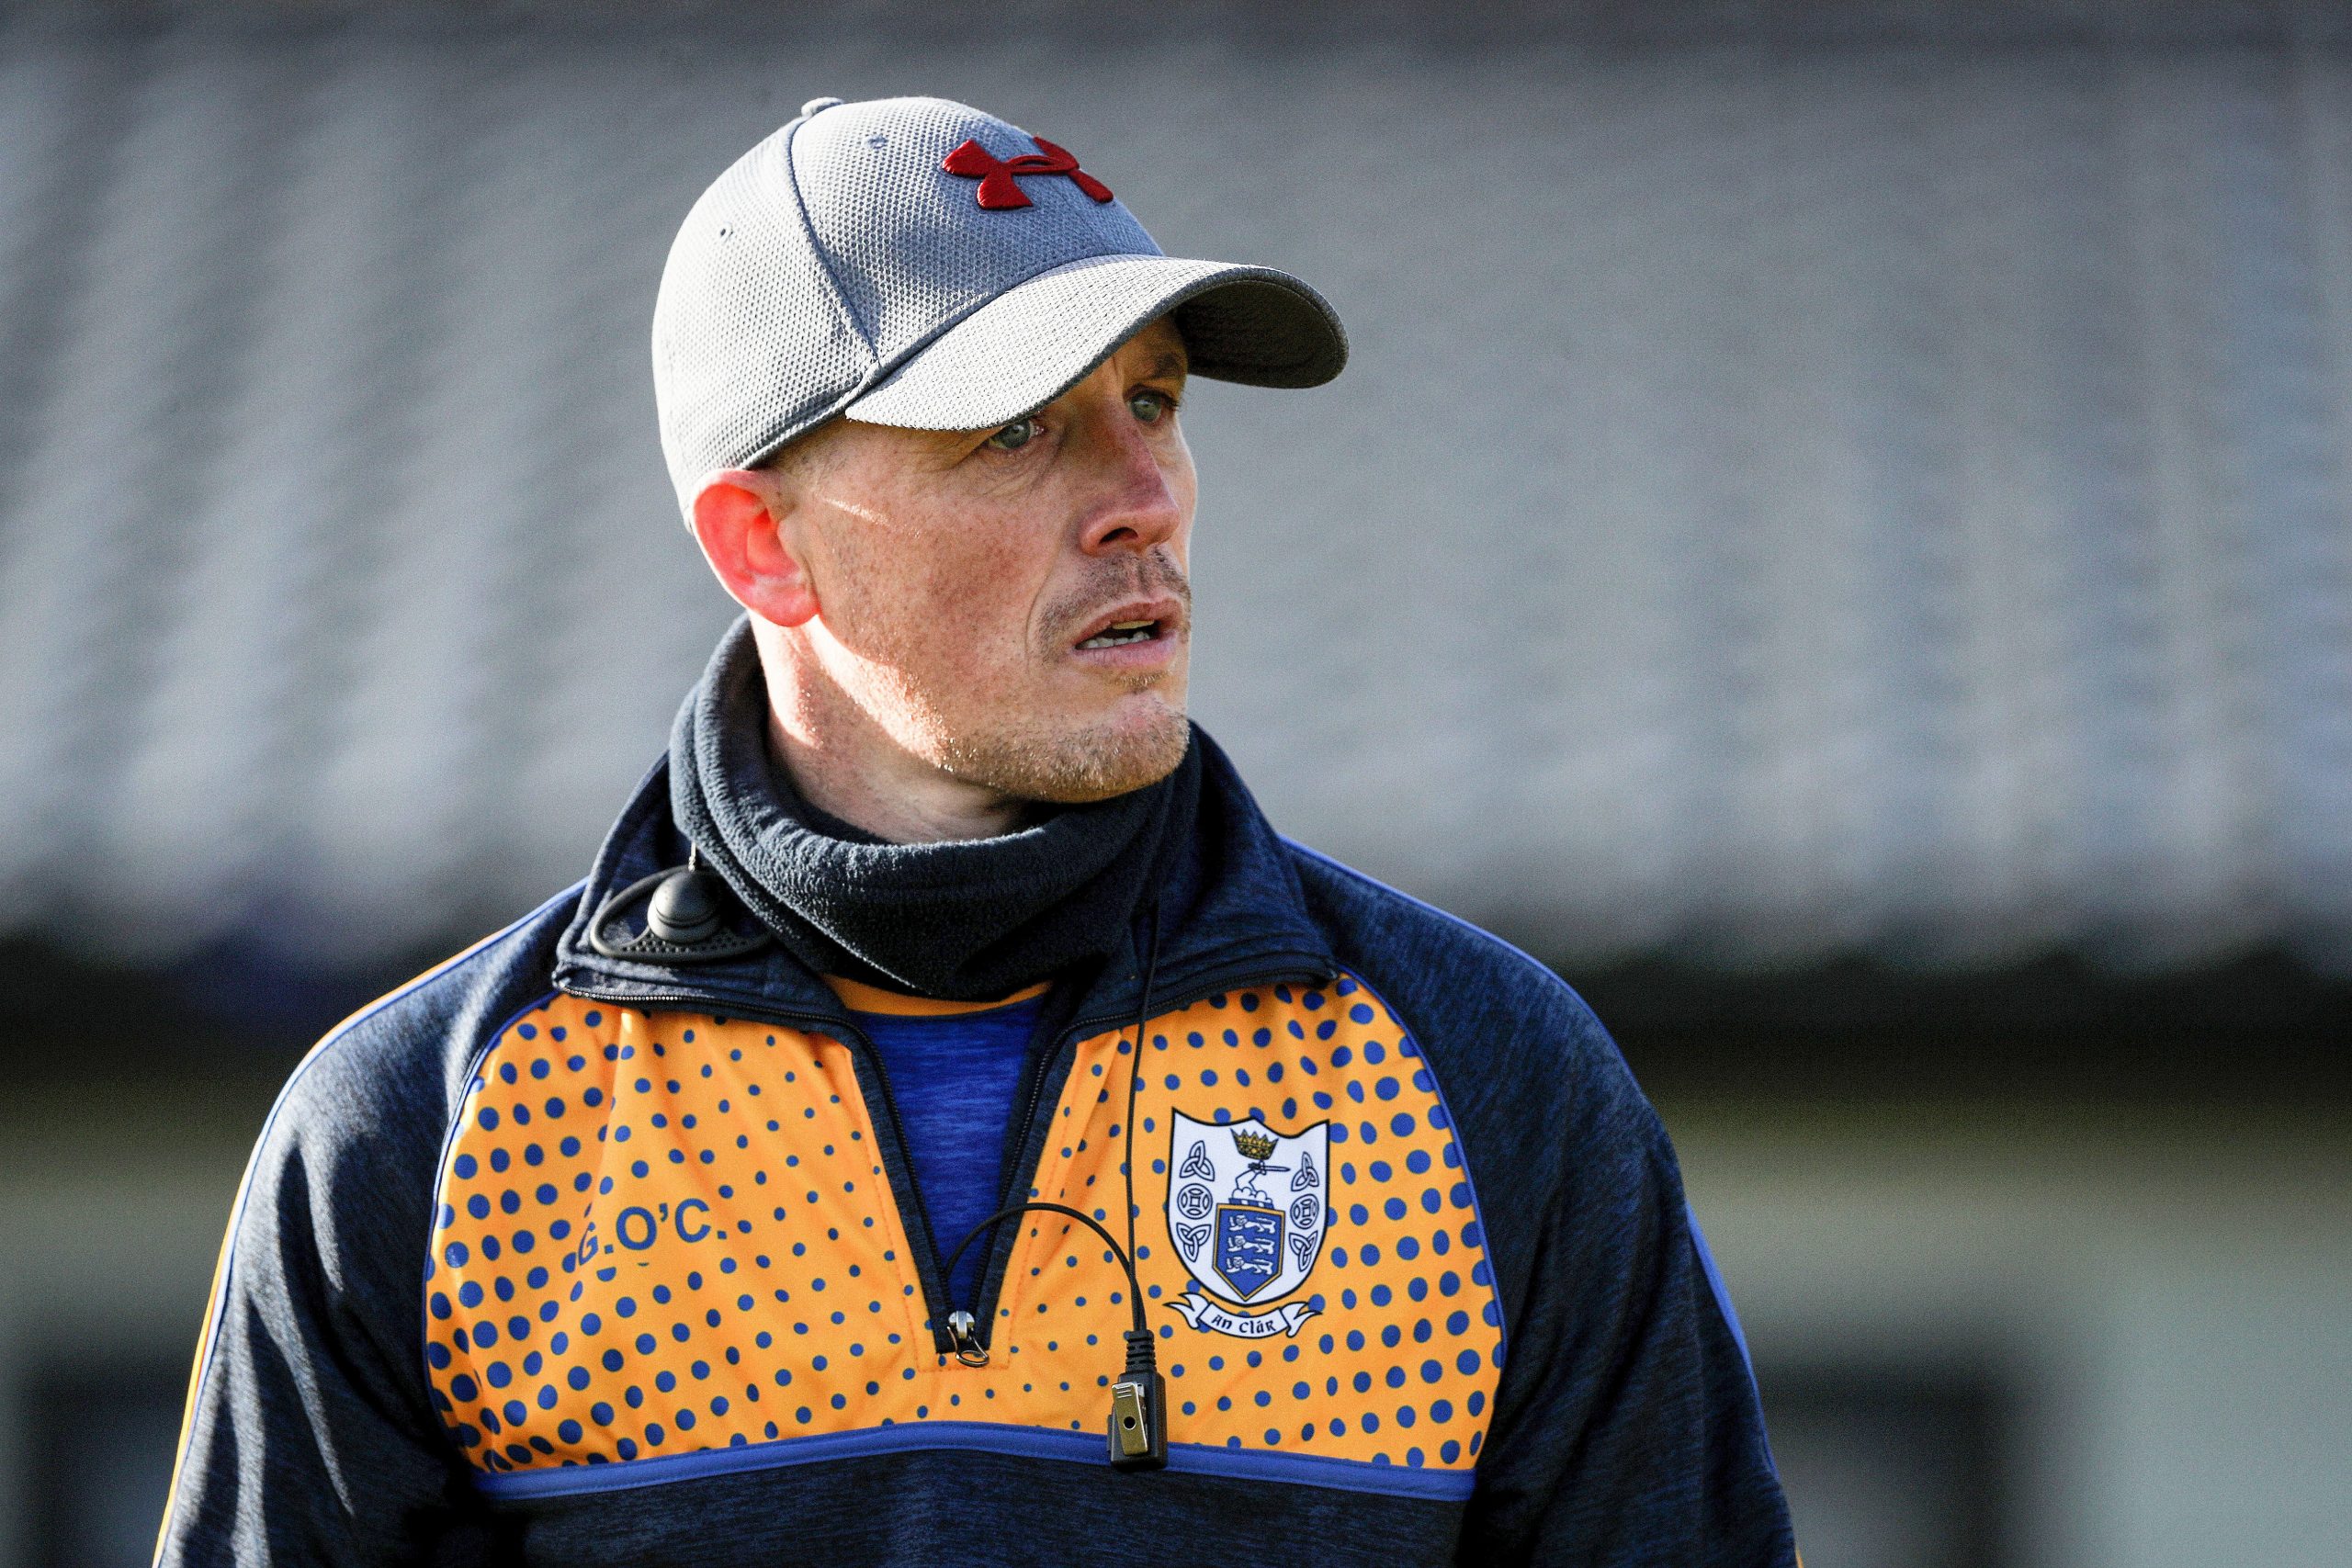 O’Connell praises Clare’s experienced leaders